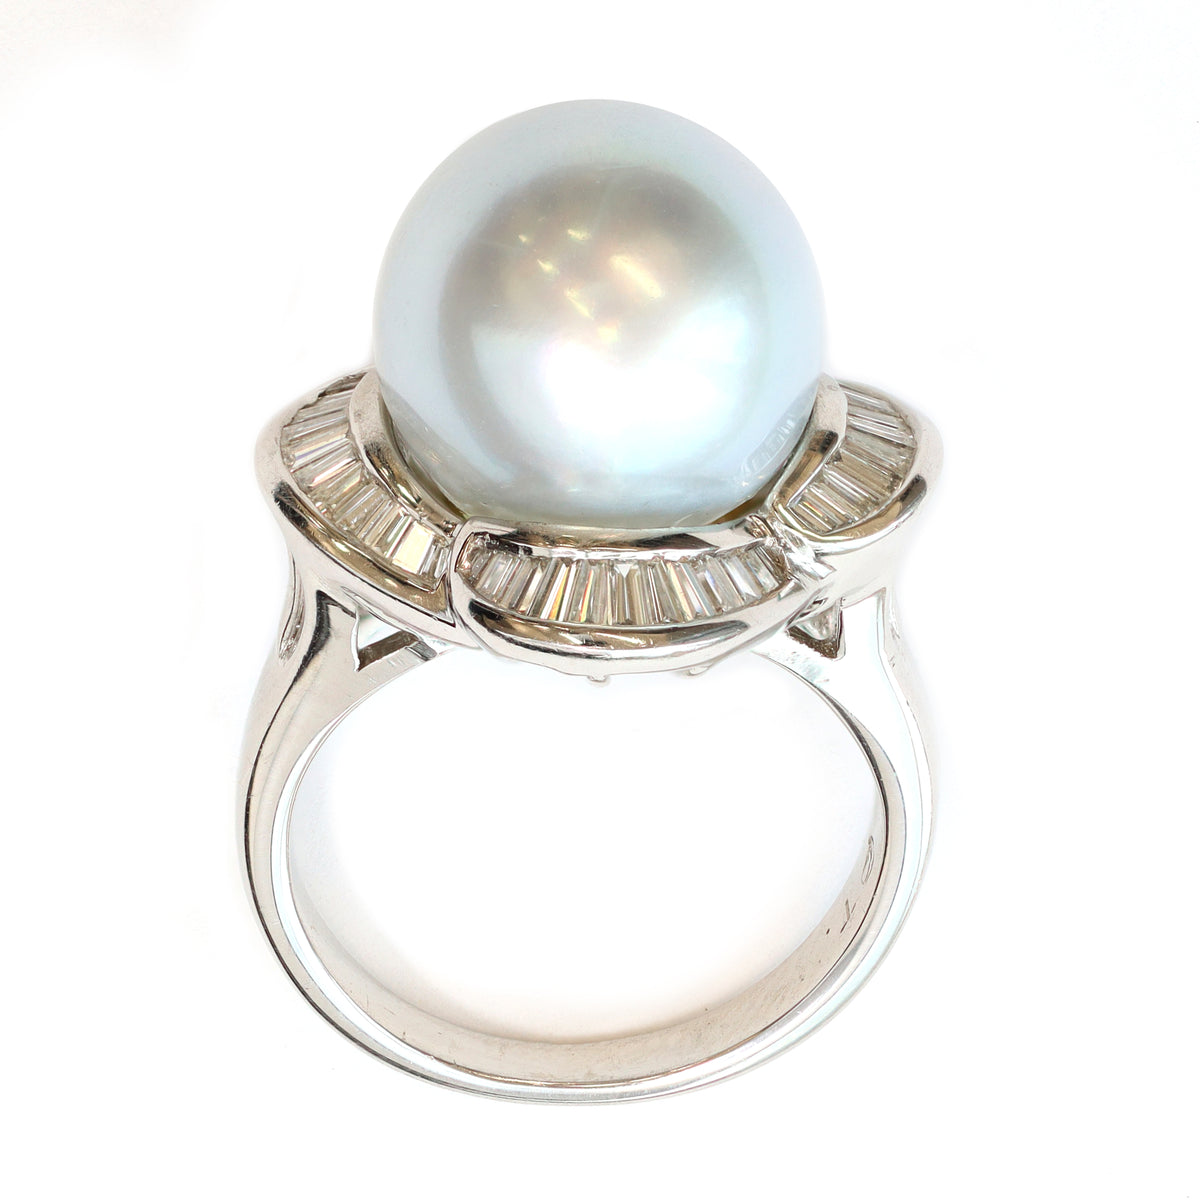 Ballerina South Sea Pearl and Diamond Cocktail Ring in Platinum, Circa 1980 angle view